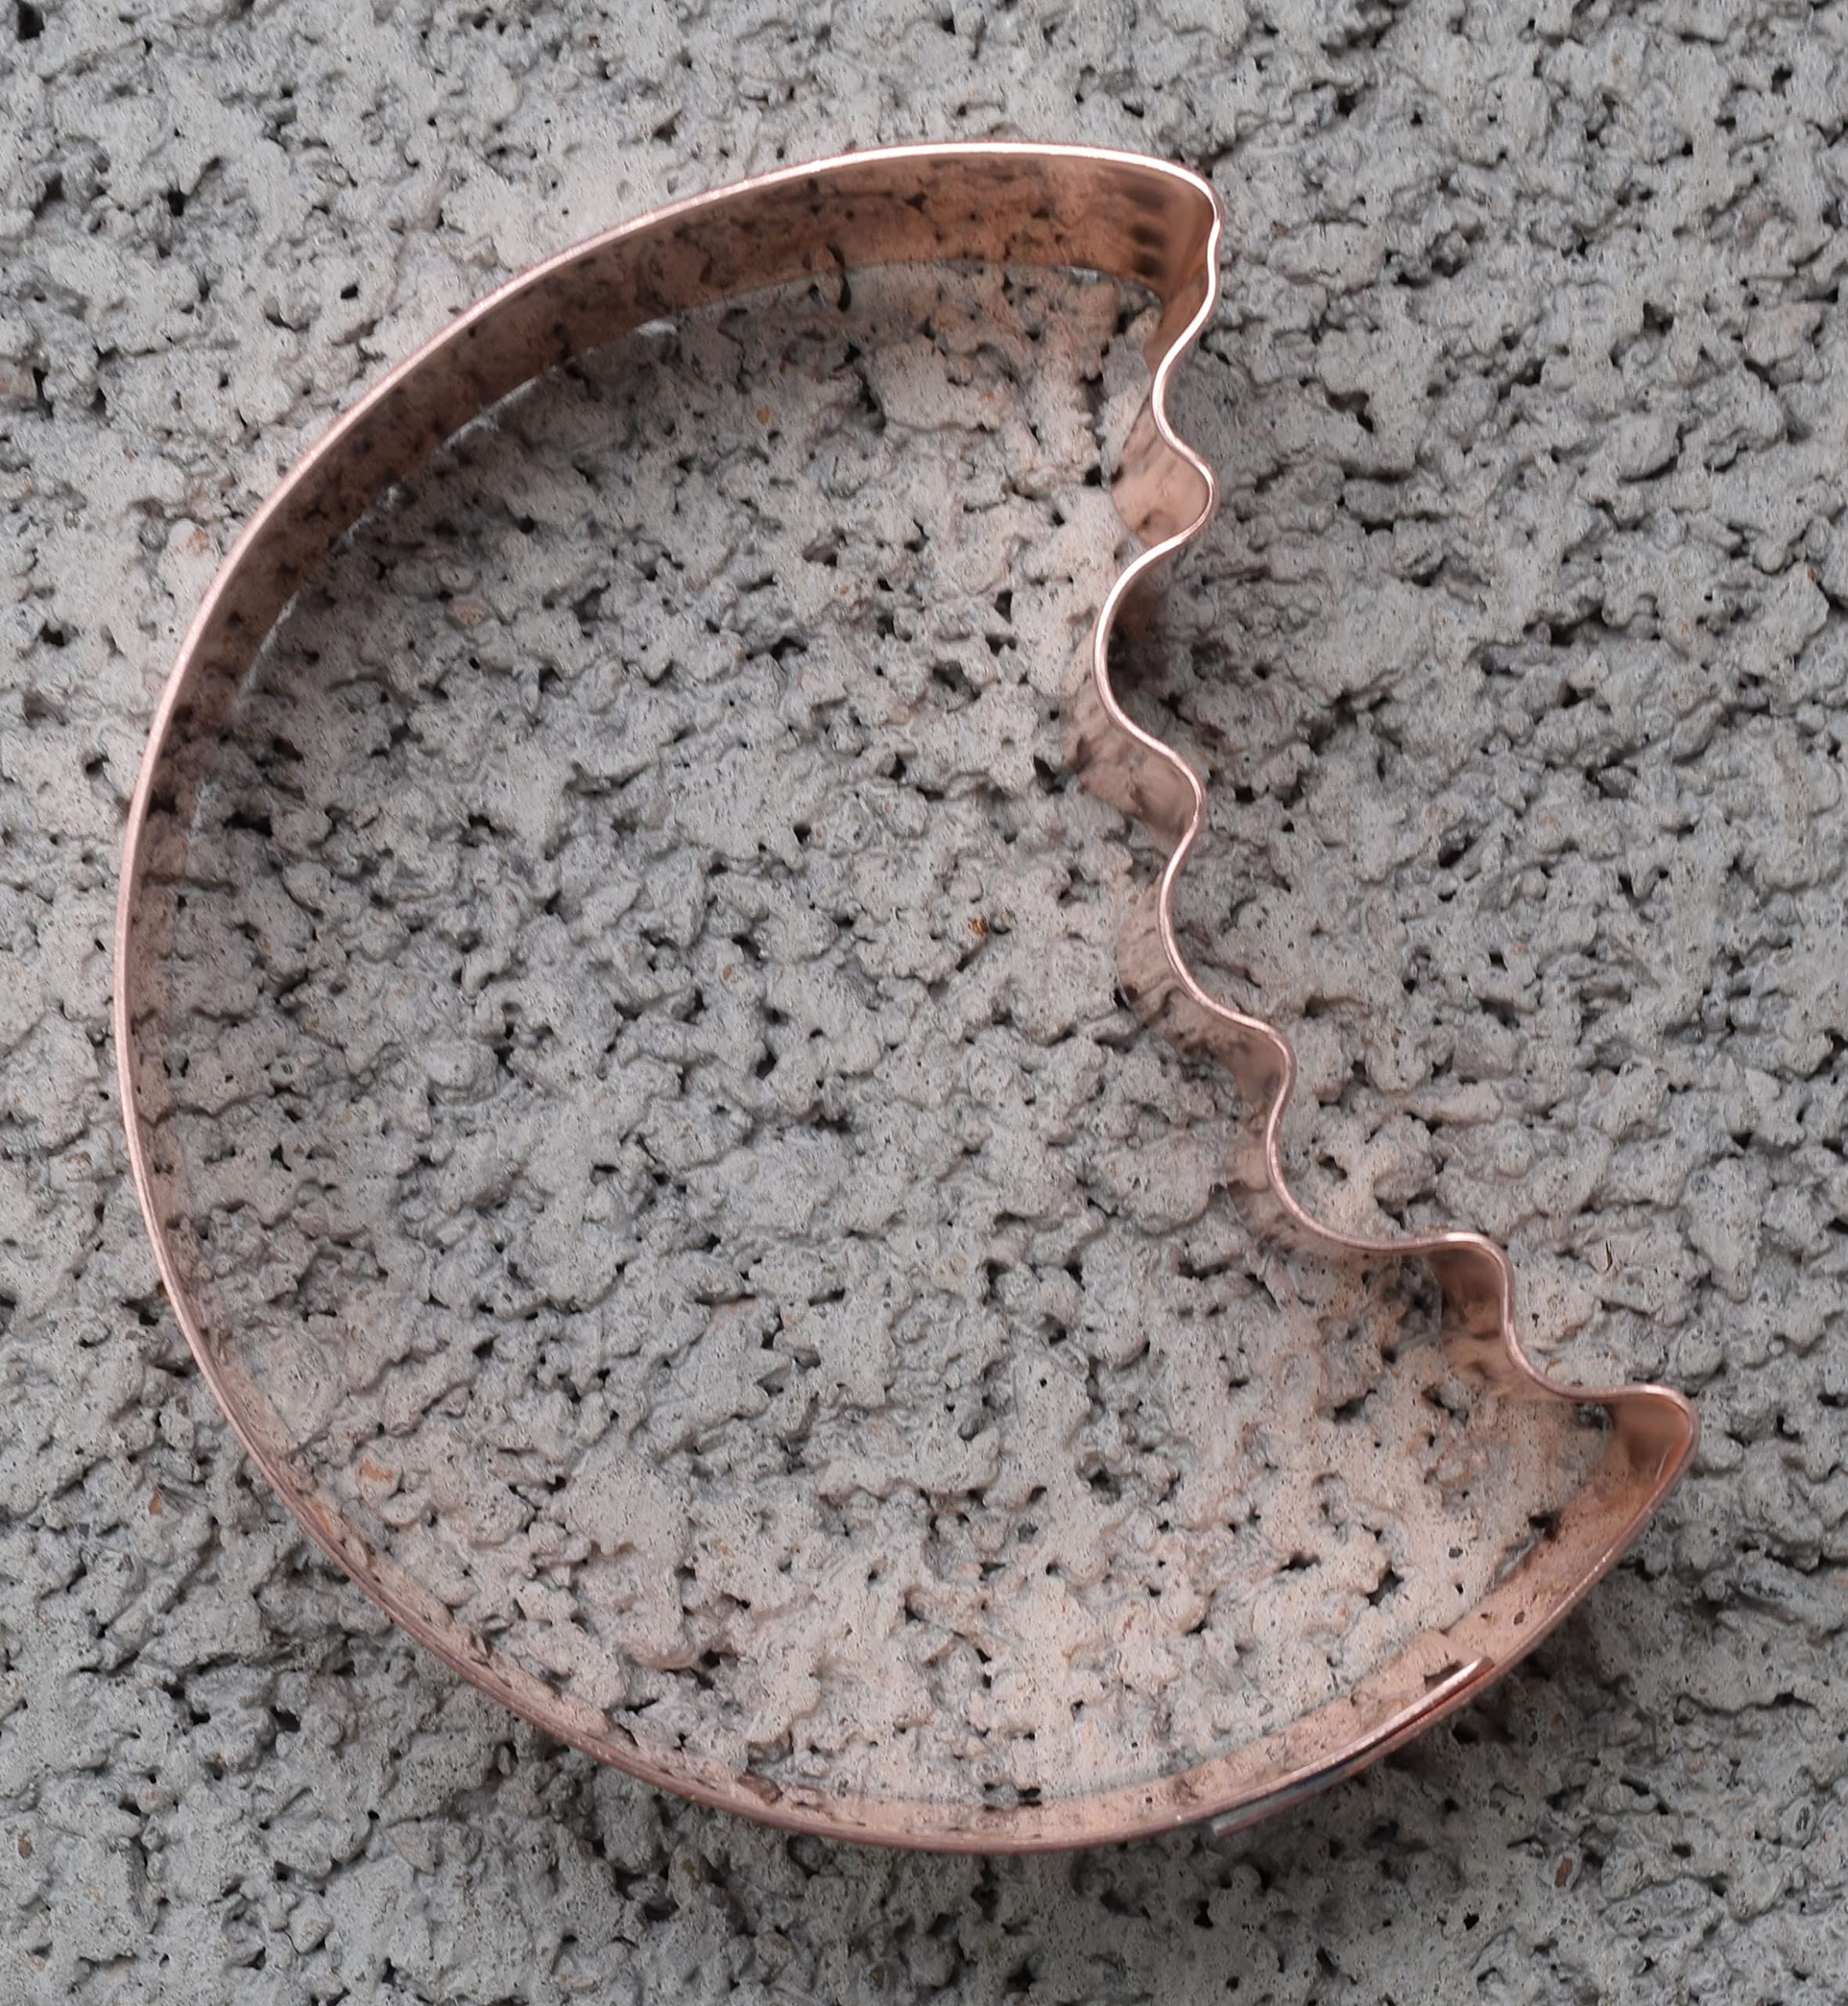 3 Inch Round Cookie Cutter with bite taken out - Handcrafted Copper Cookie Cutter by The Fussy Pup